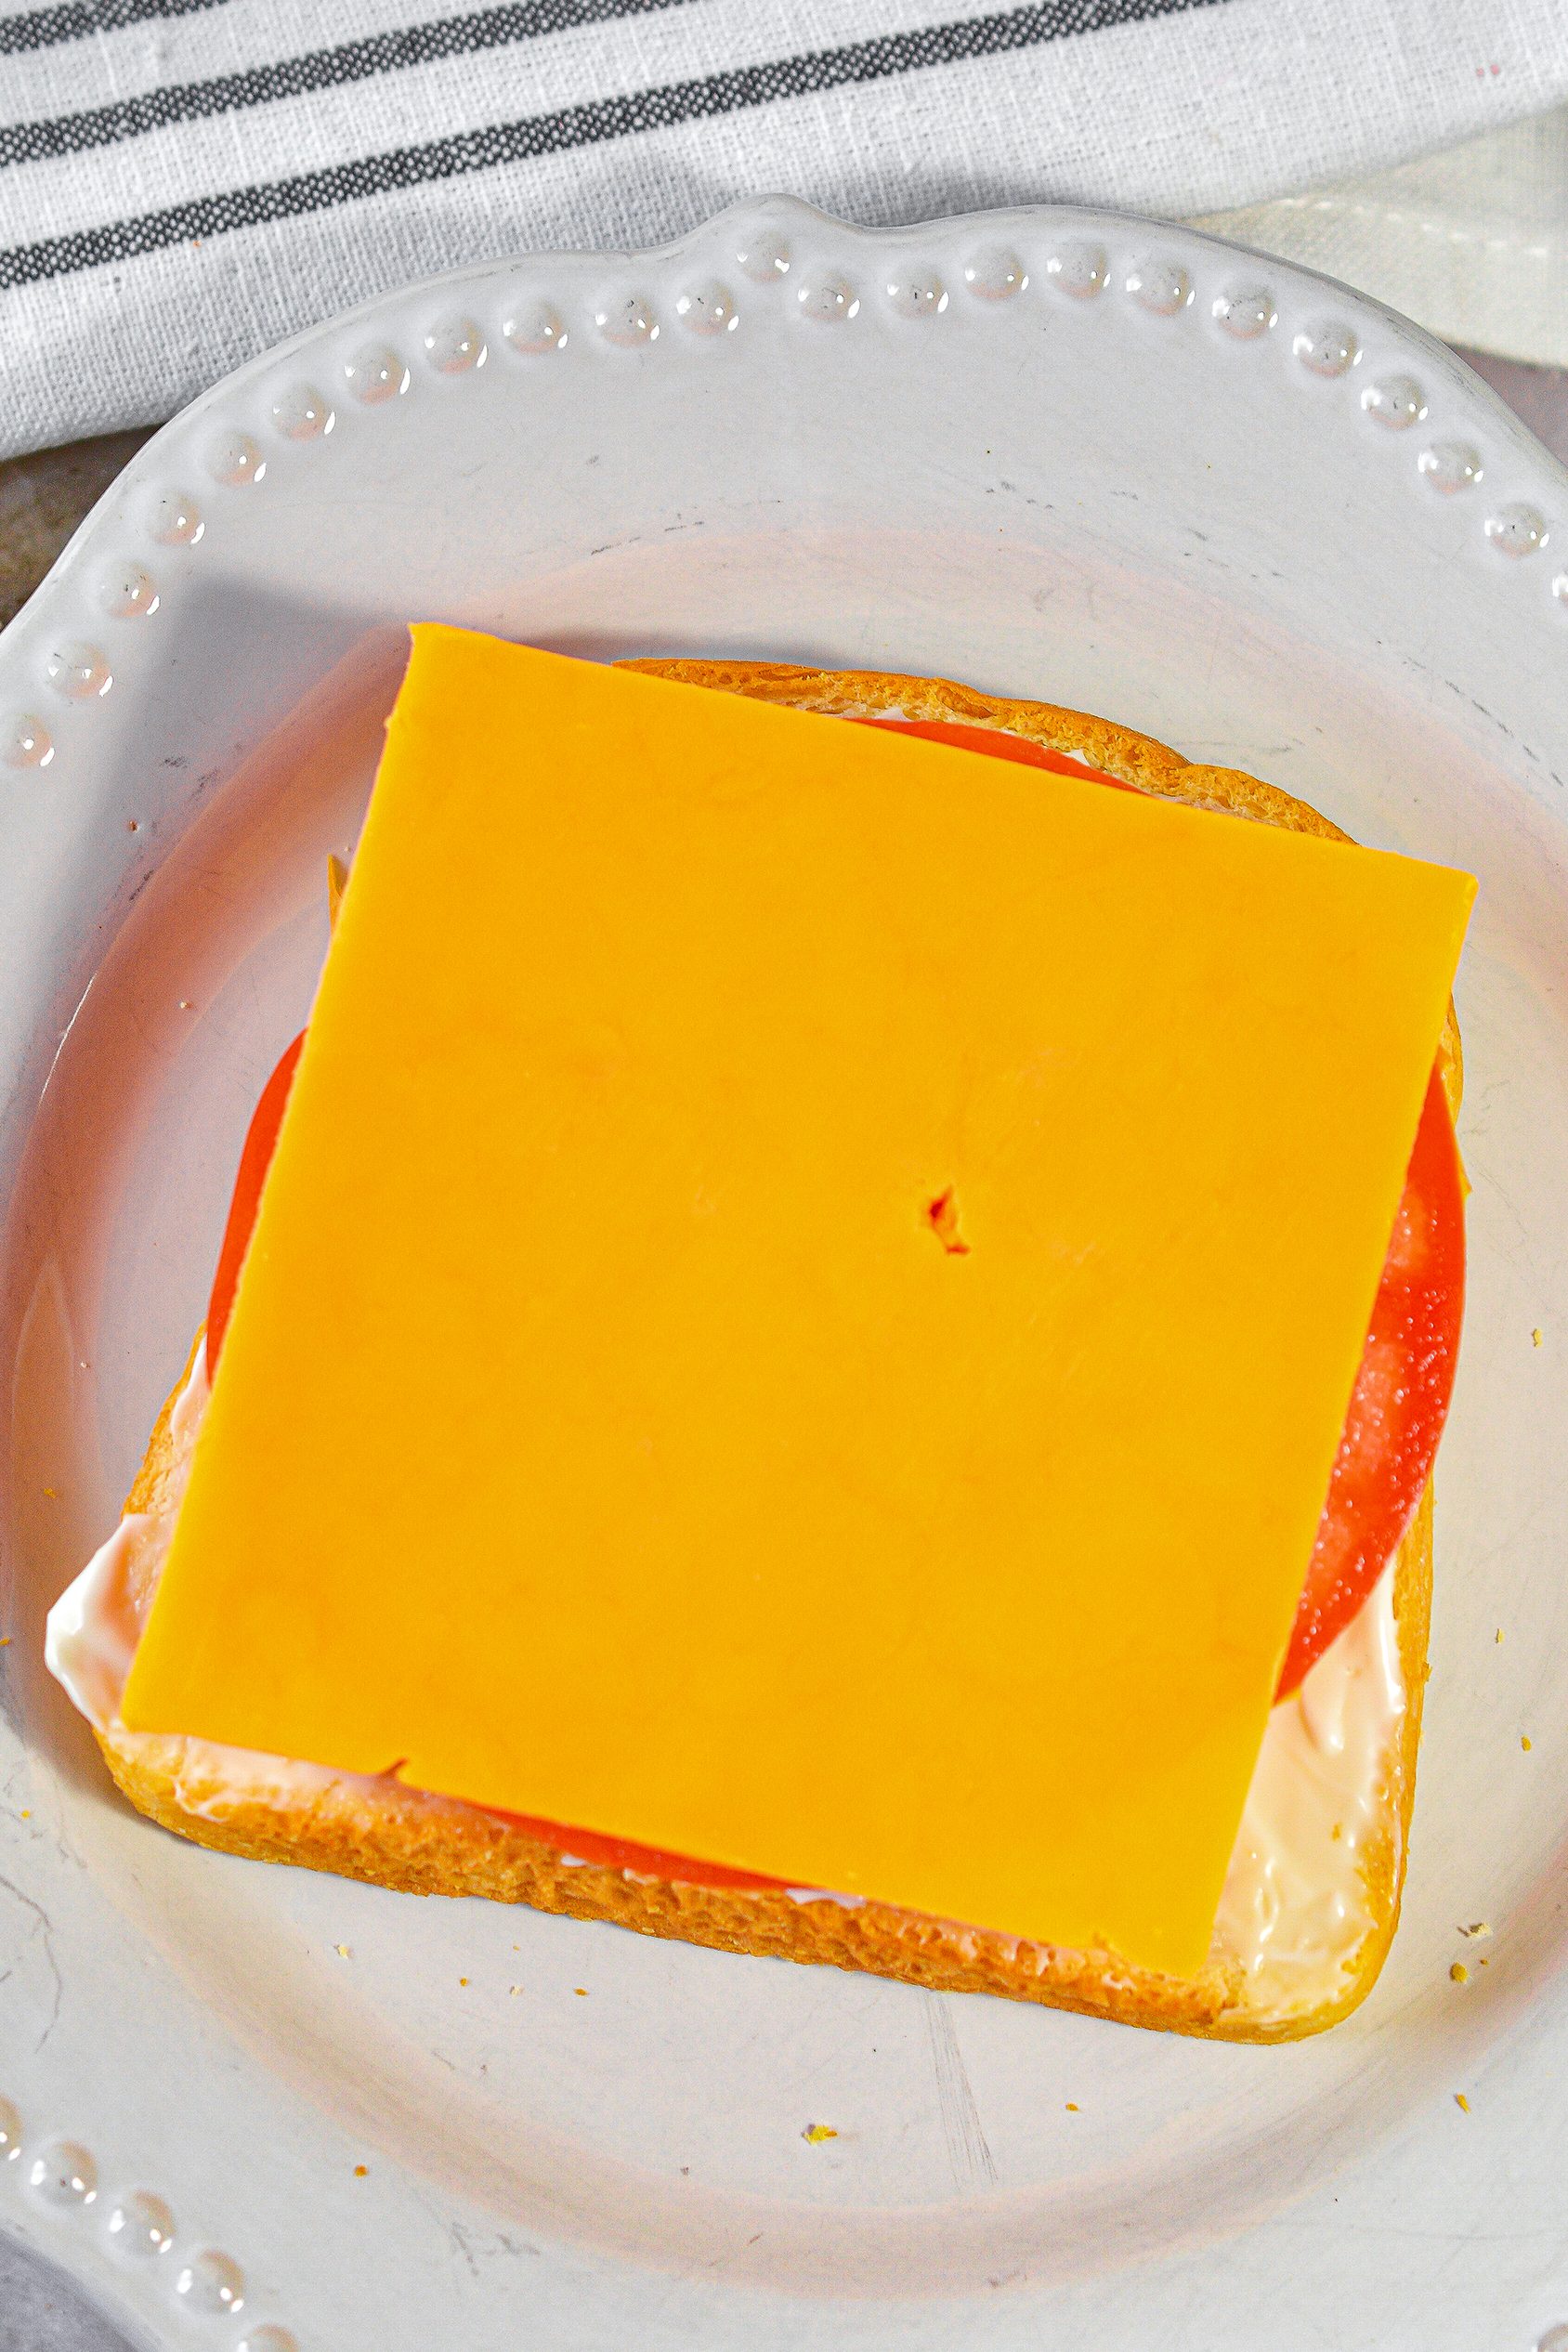 Add a slice of cheese on top of the tomato slices.